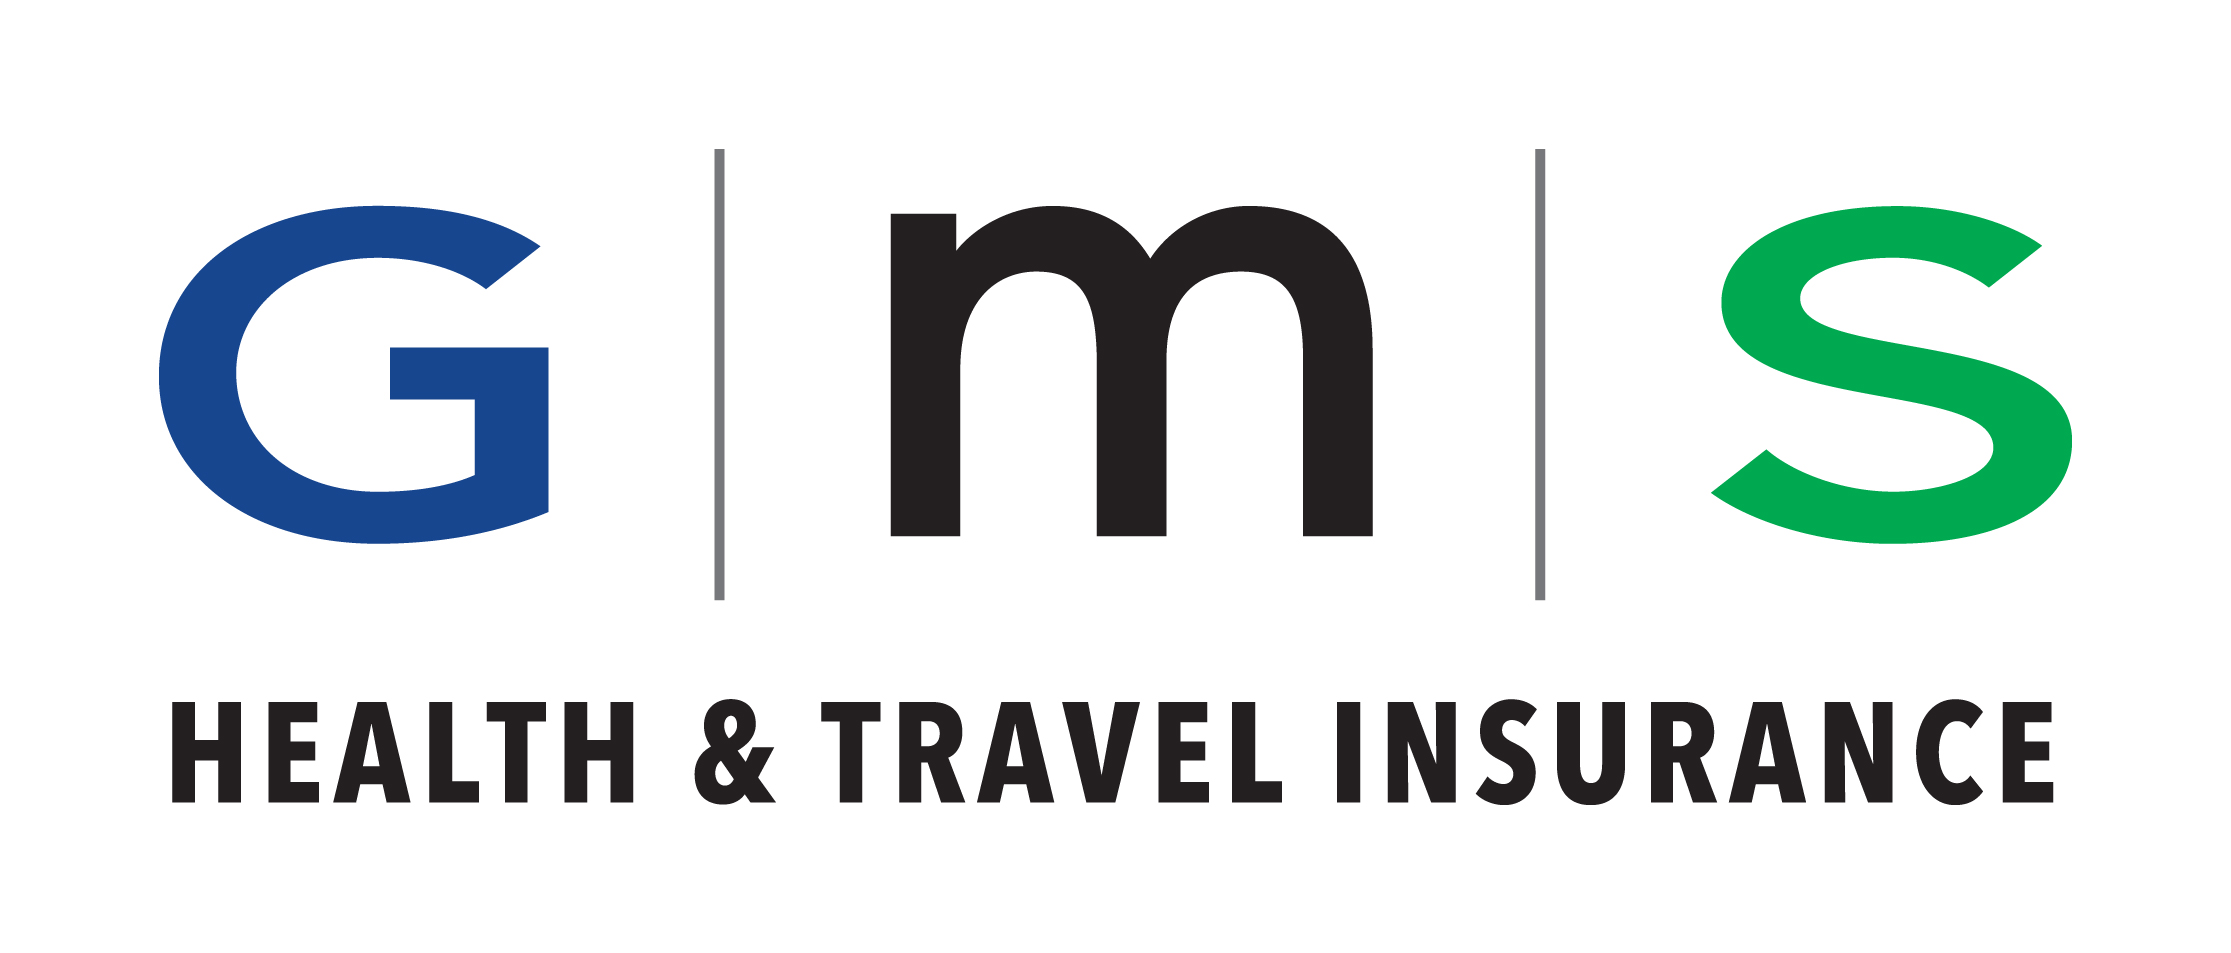 Health and Travel Insurance Melville Agencies (1974) Ltd.